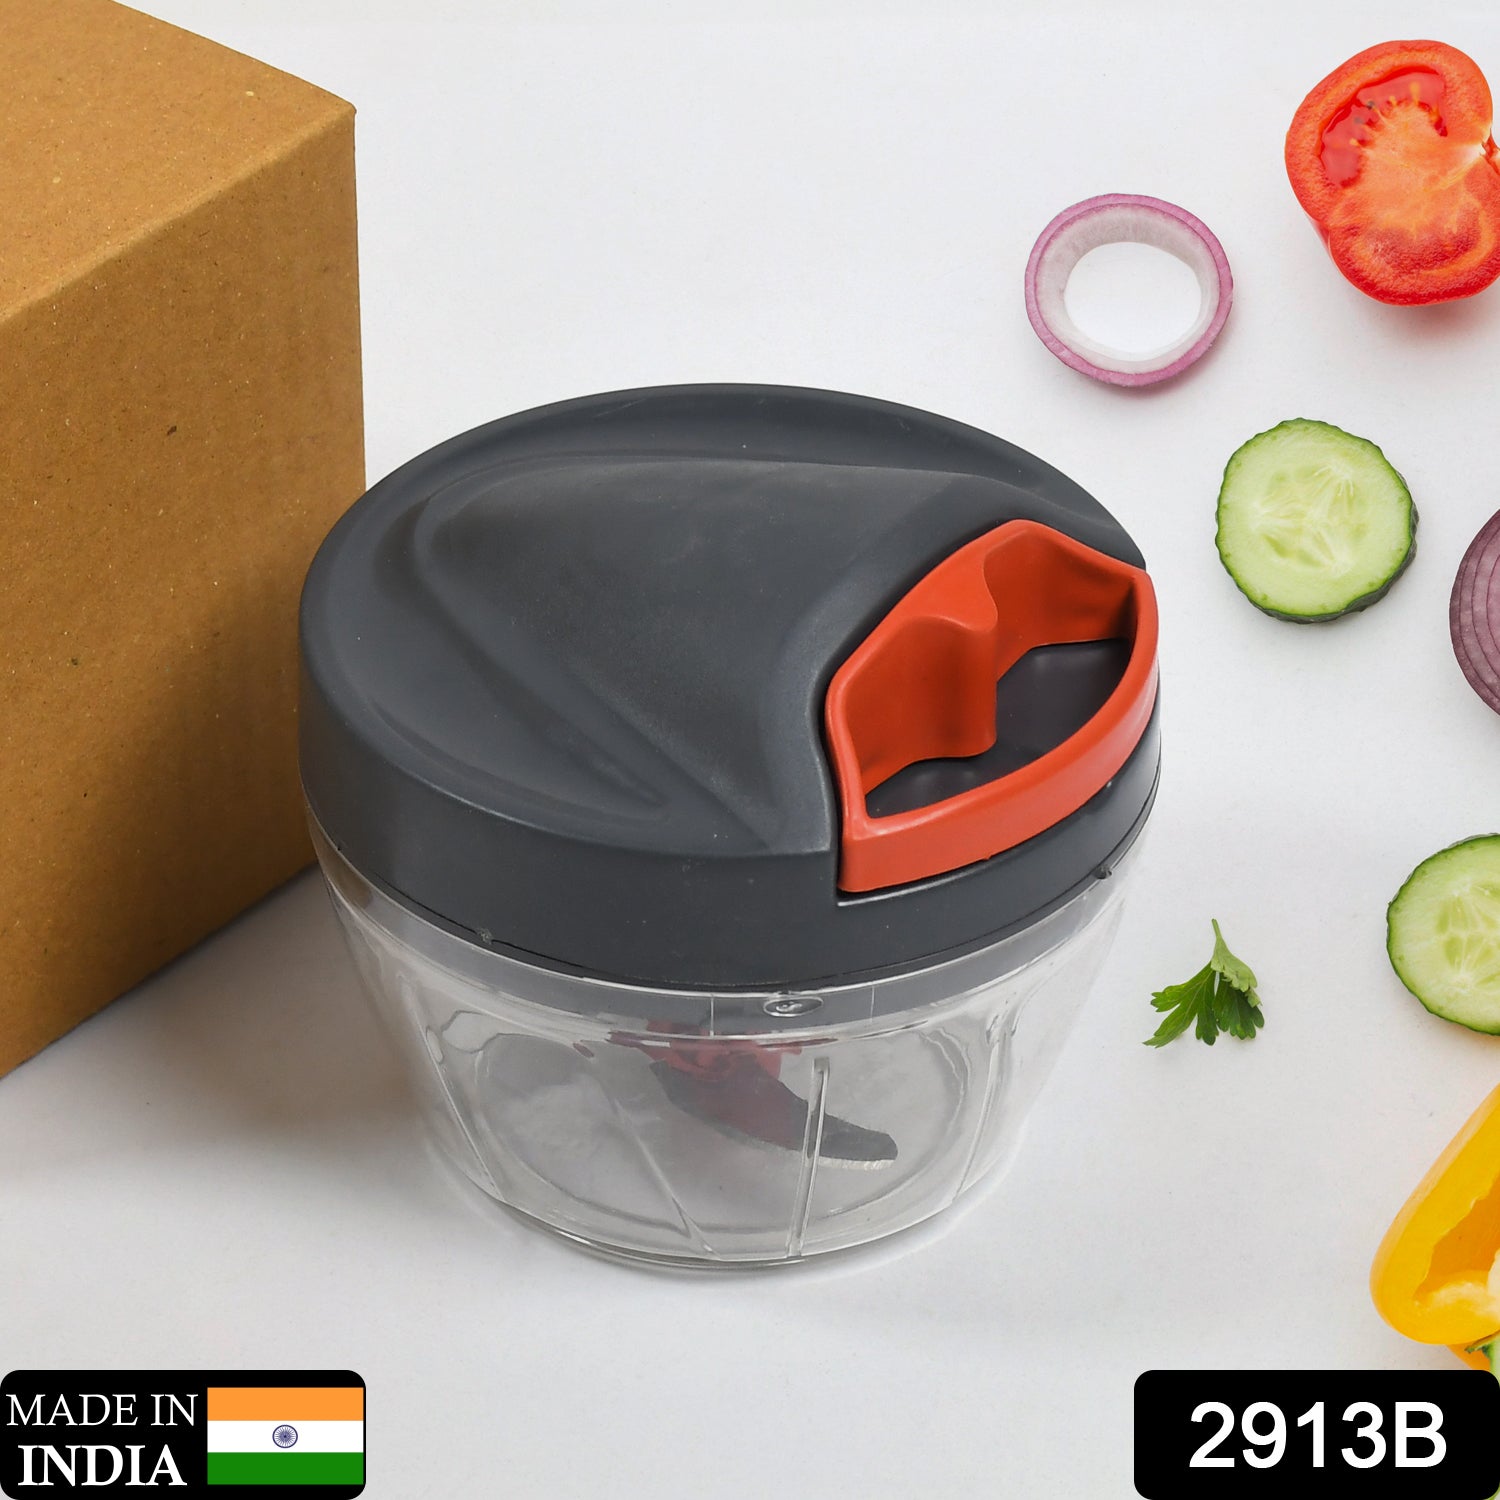 2913b Chopper with 3 Blades for Effortlessly Chopping Vegetables and Fruits for Your Kitchen (brown box) 